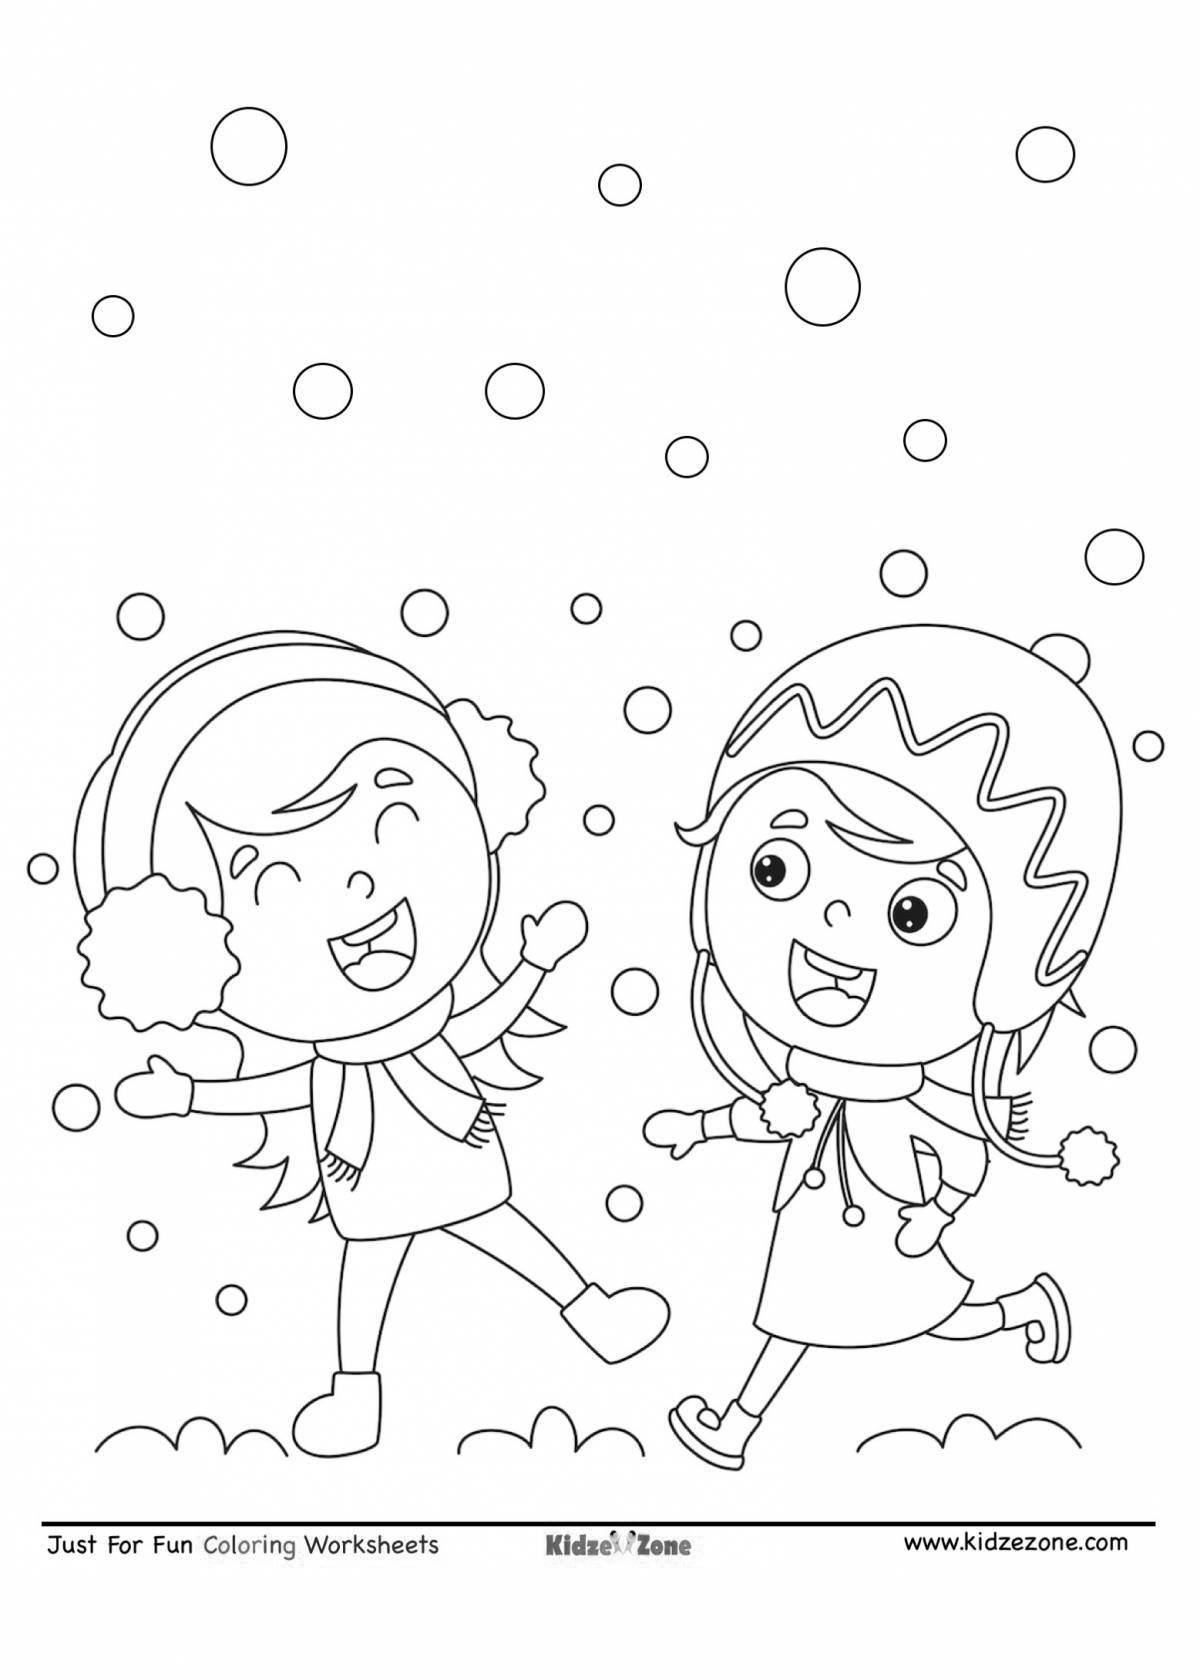 Glittering snowball coloring book